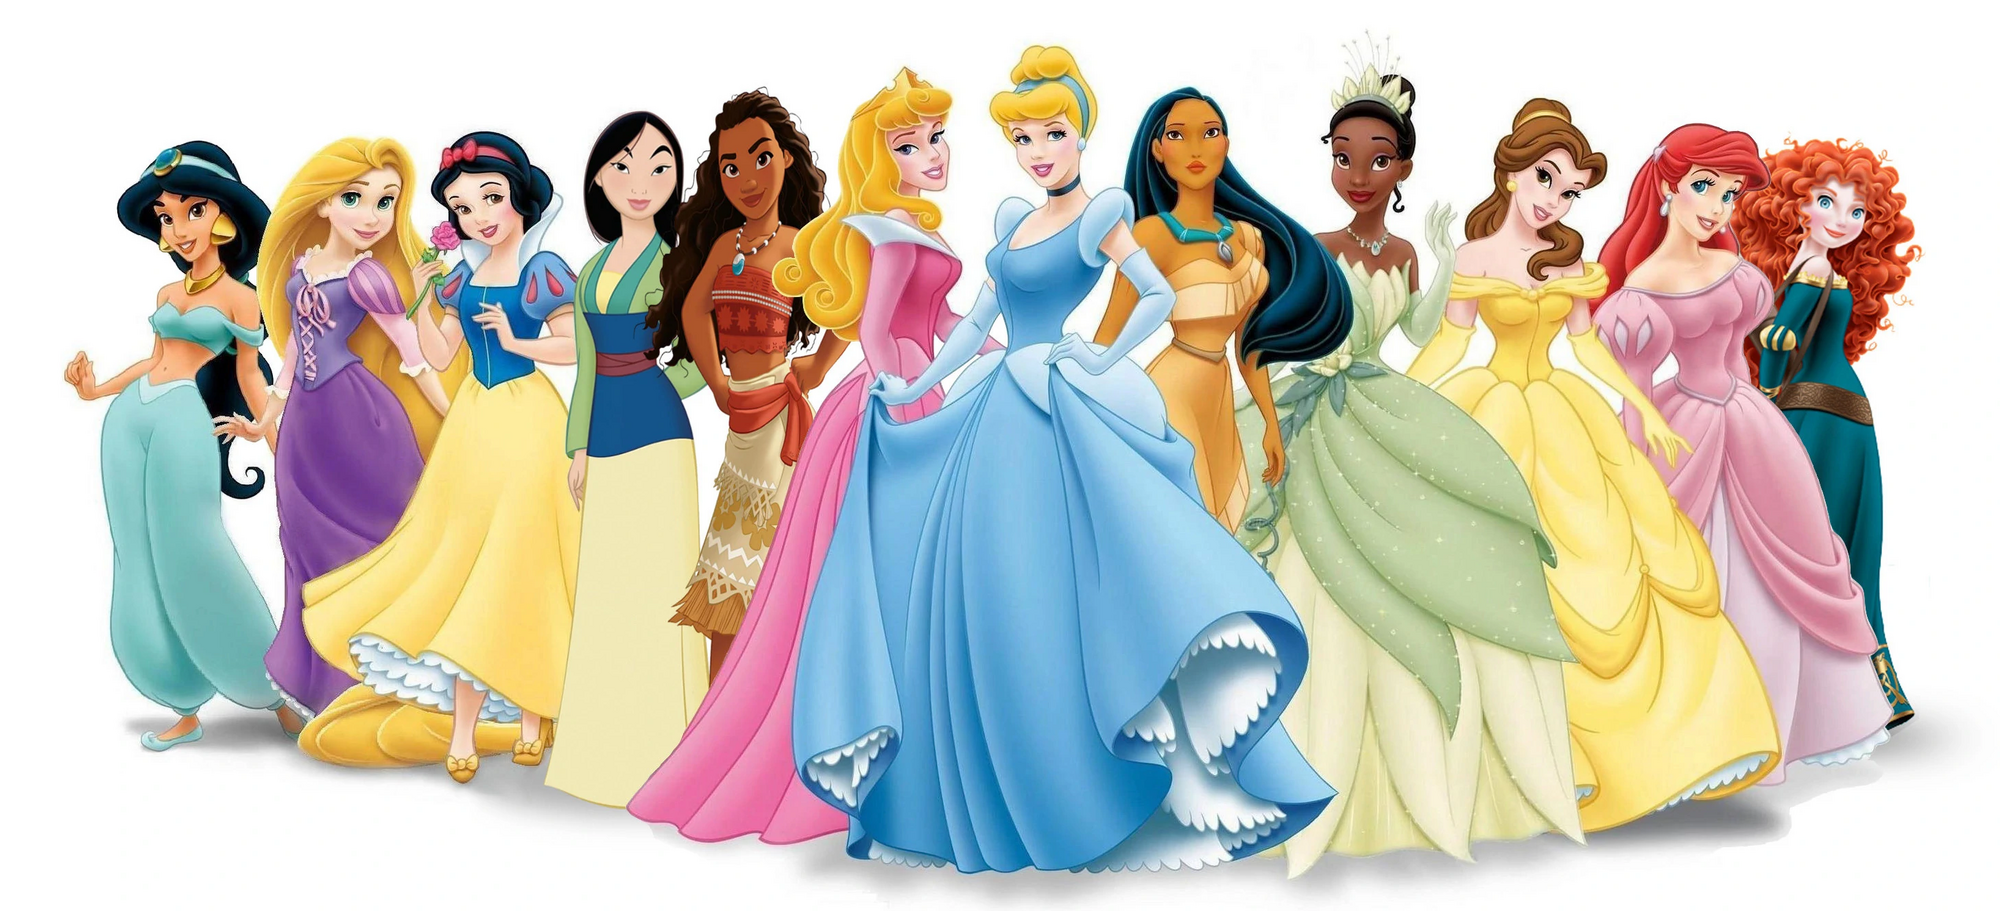 The Definitive Ranking of the Disney Princesses! - AllEars.Net